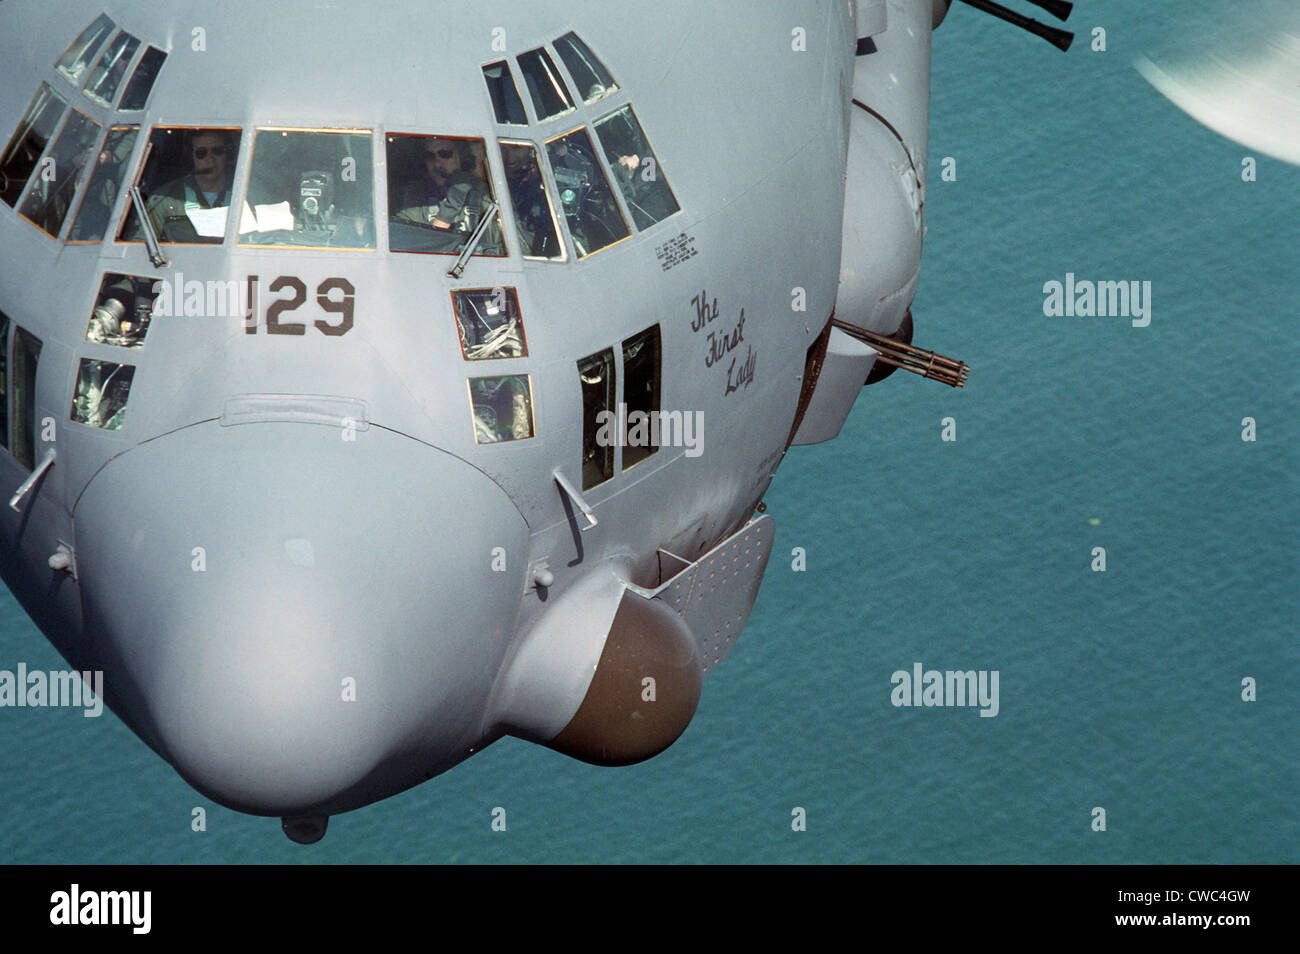 Close-up view of an C-130 Hercules gunship flying during Ronald Reagan's operations against Nicaragua's leftist government. Stock Photo